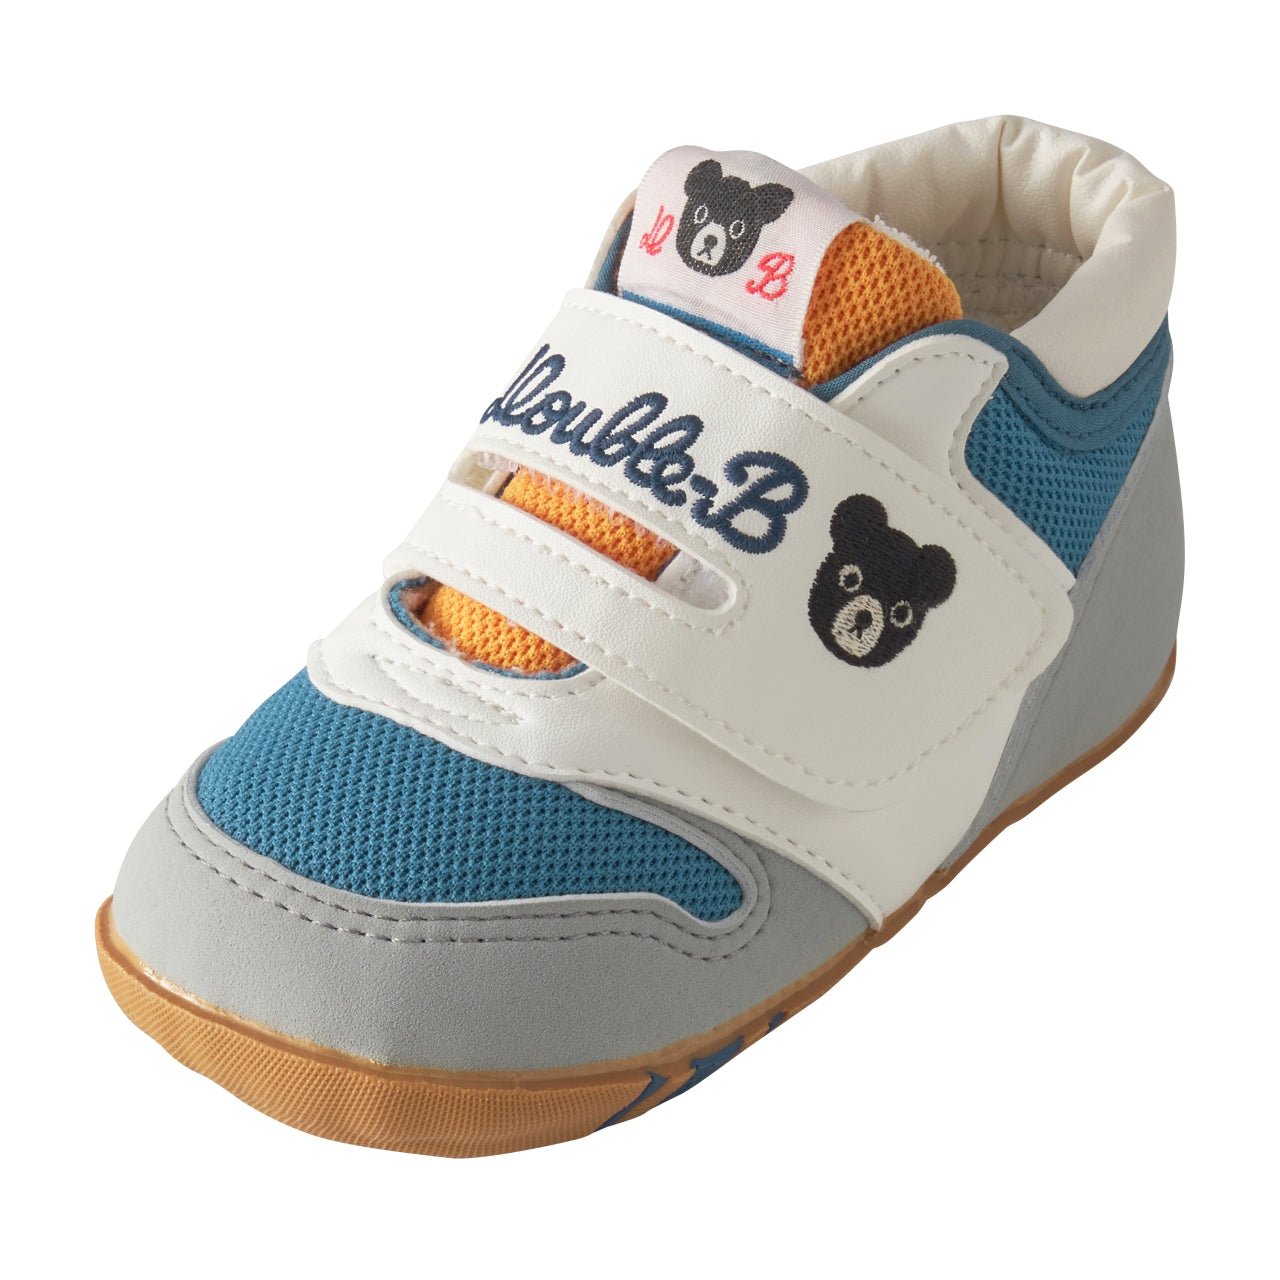 DOUBLE_B Sporty First Walker Shoes - 63-9304-384-06-11H